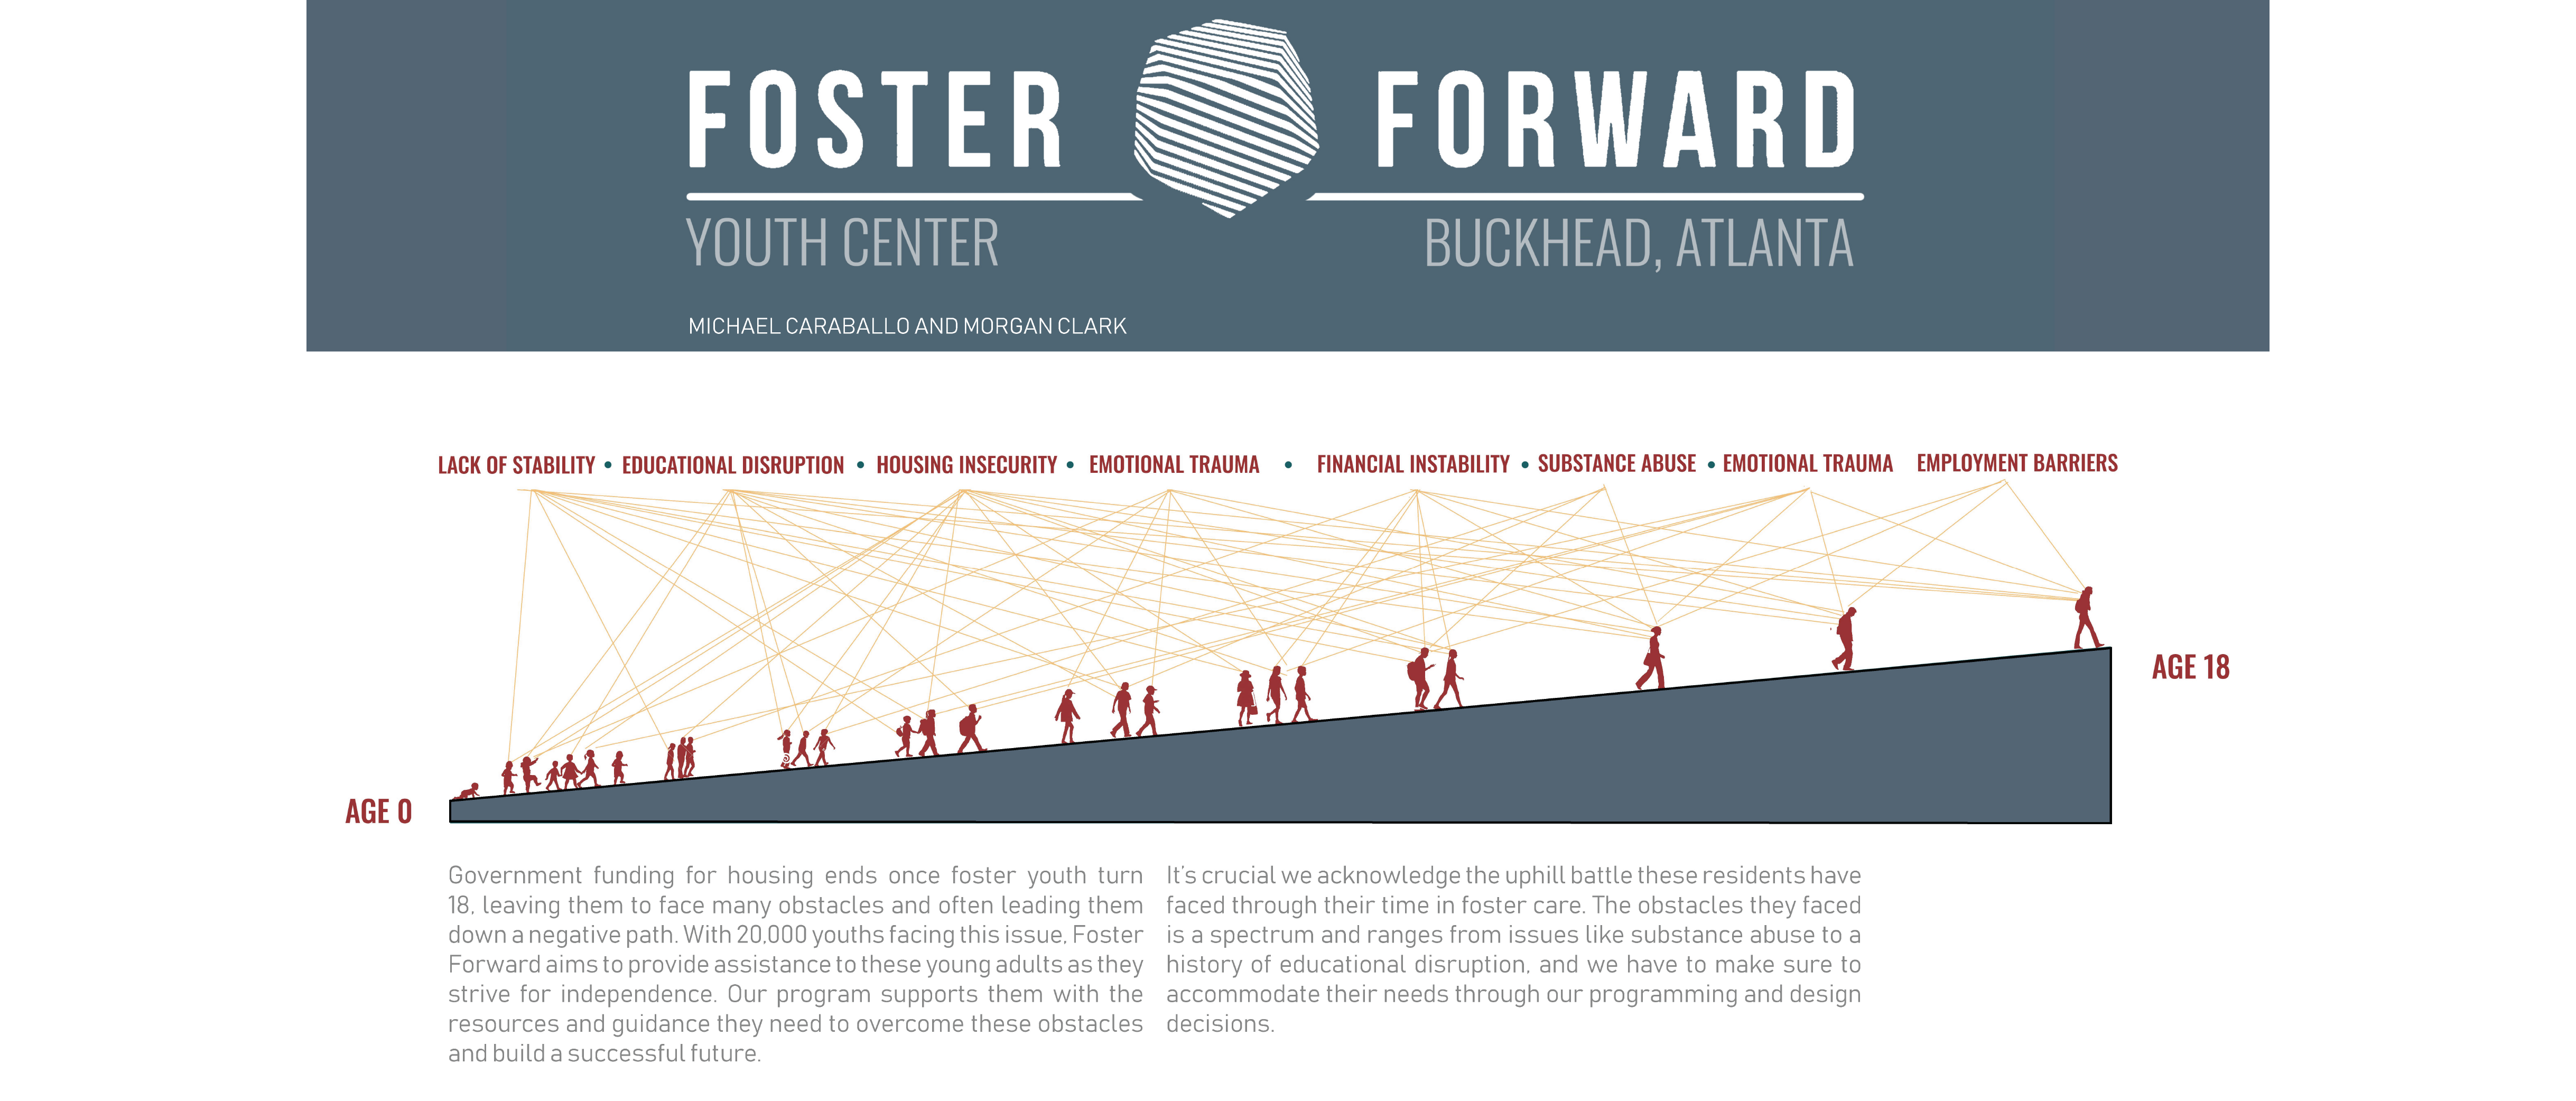 Foster Forward Youth Center | Michael Caraballo & Morgan Clark | Arch 8920 | Professors Albright, Heine and Ersoy